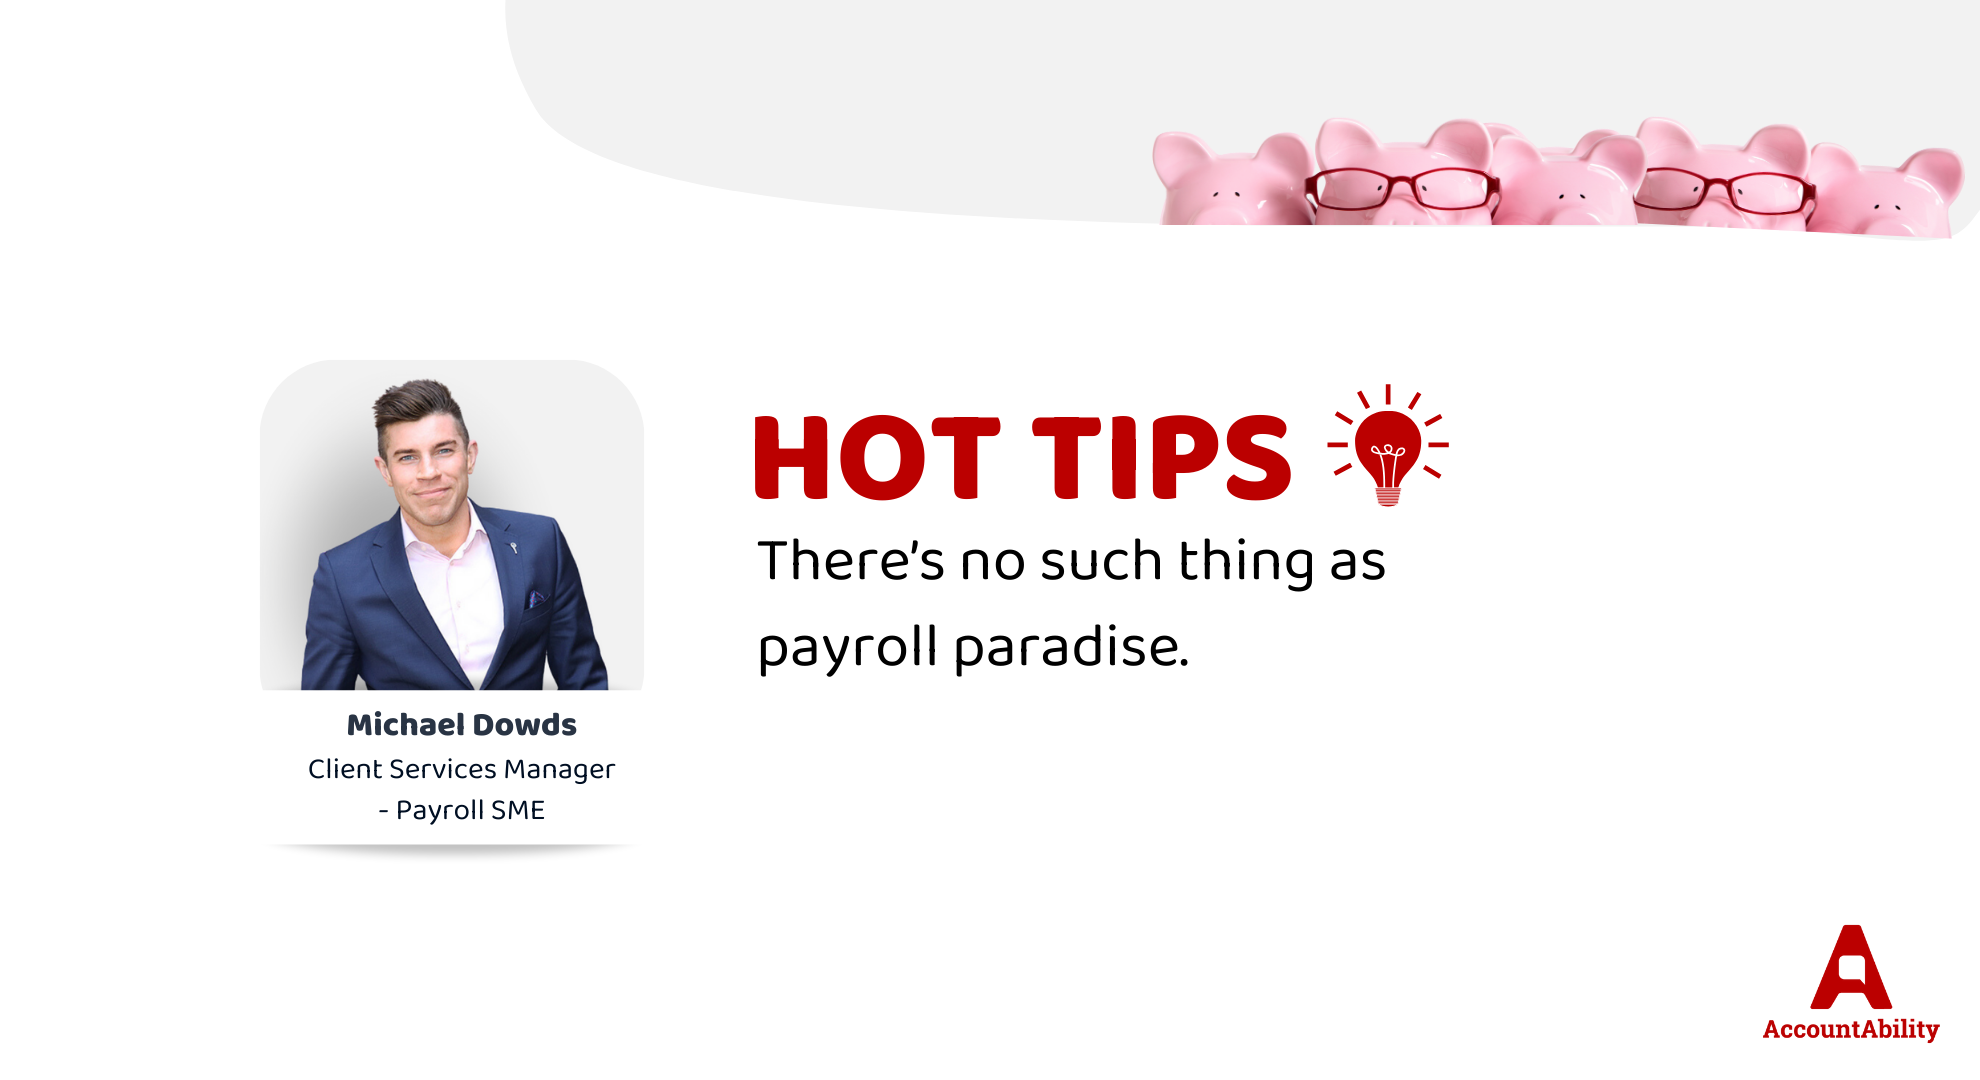 There's no such thing as payroll paradise